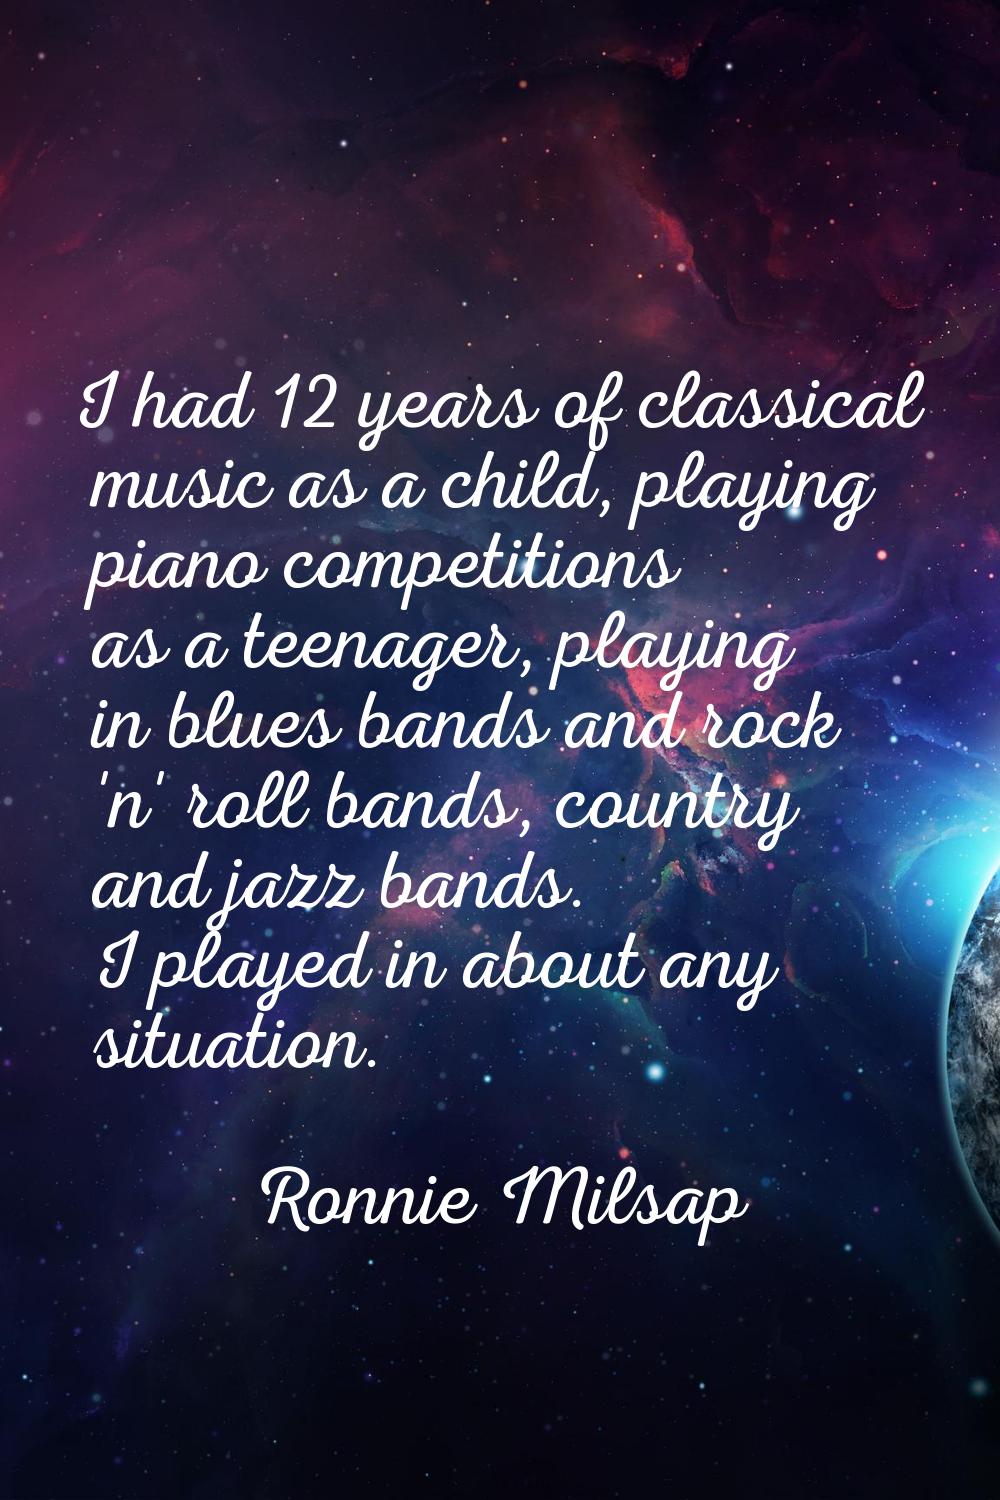 I had 12 years of classical music as a child, playing piano competitions as a teenager, playing in 